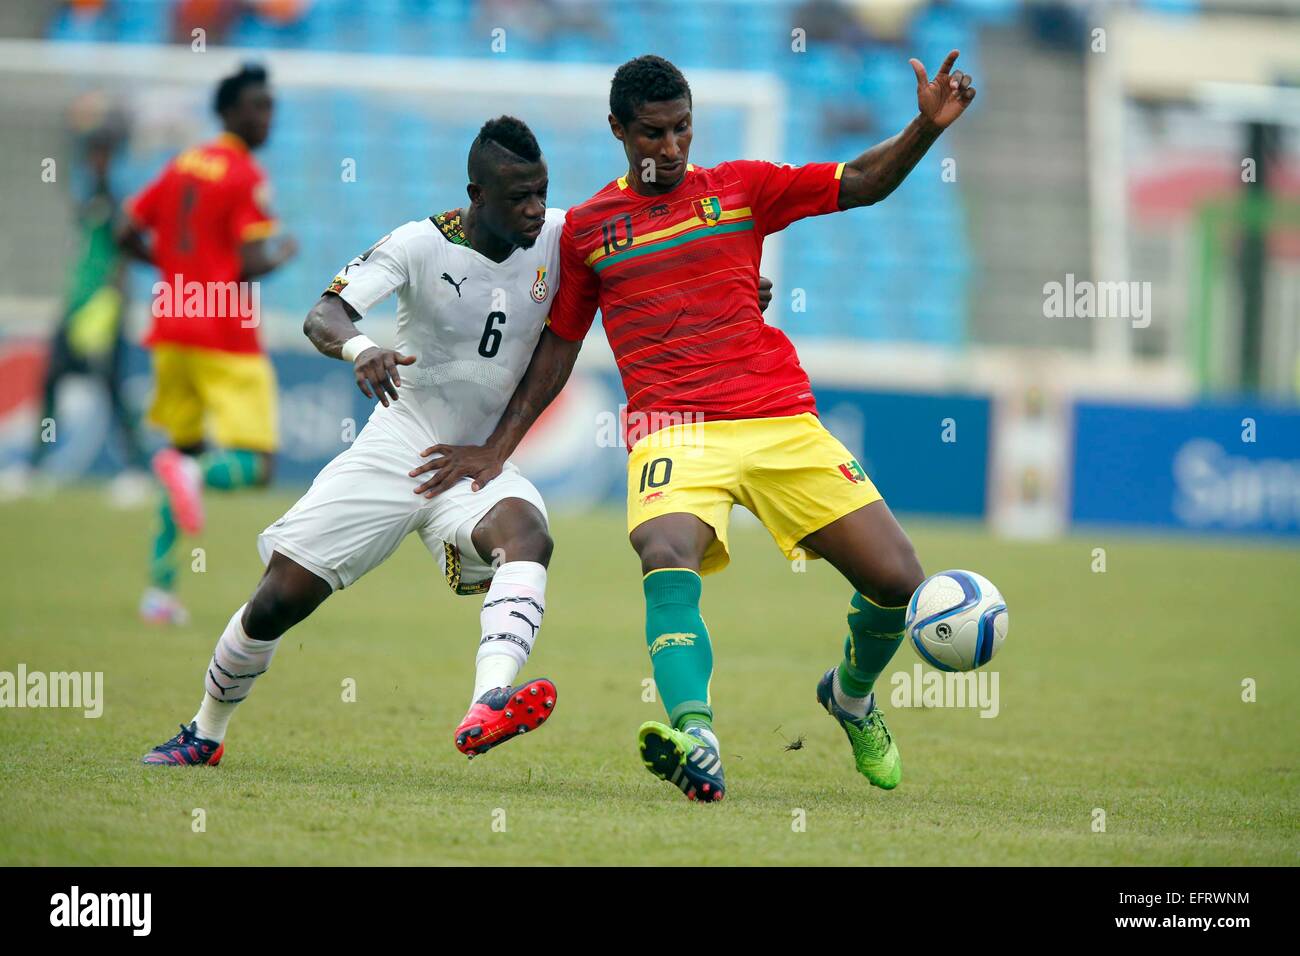 Kevin Constant (R) of Guinea  shields the ball against Afriyie Acquah  (L) Ghana during their AFCON 2015 Quarter Finals Match on February 1 2015 at Estadio de Malabo Equatorial Guinea. Photo/Mohammed Amin/www.pic-centre.com (Equatorial Guinea) Stock Photo